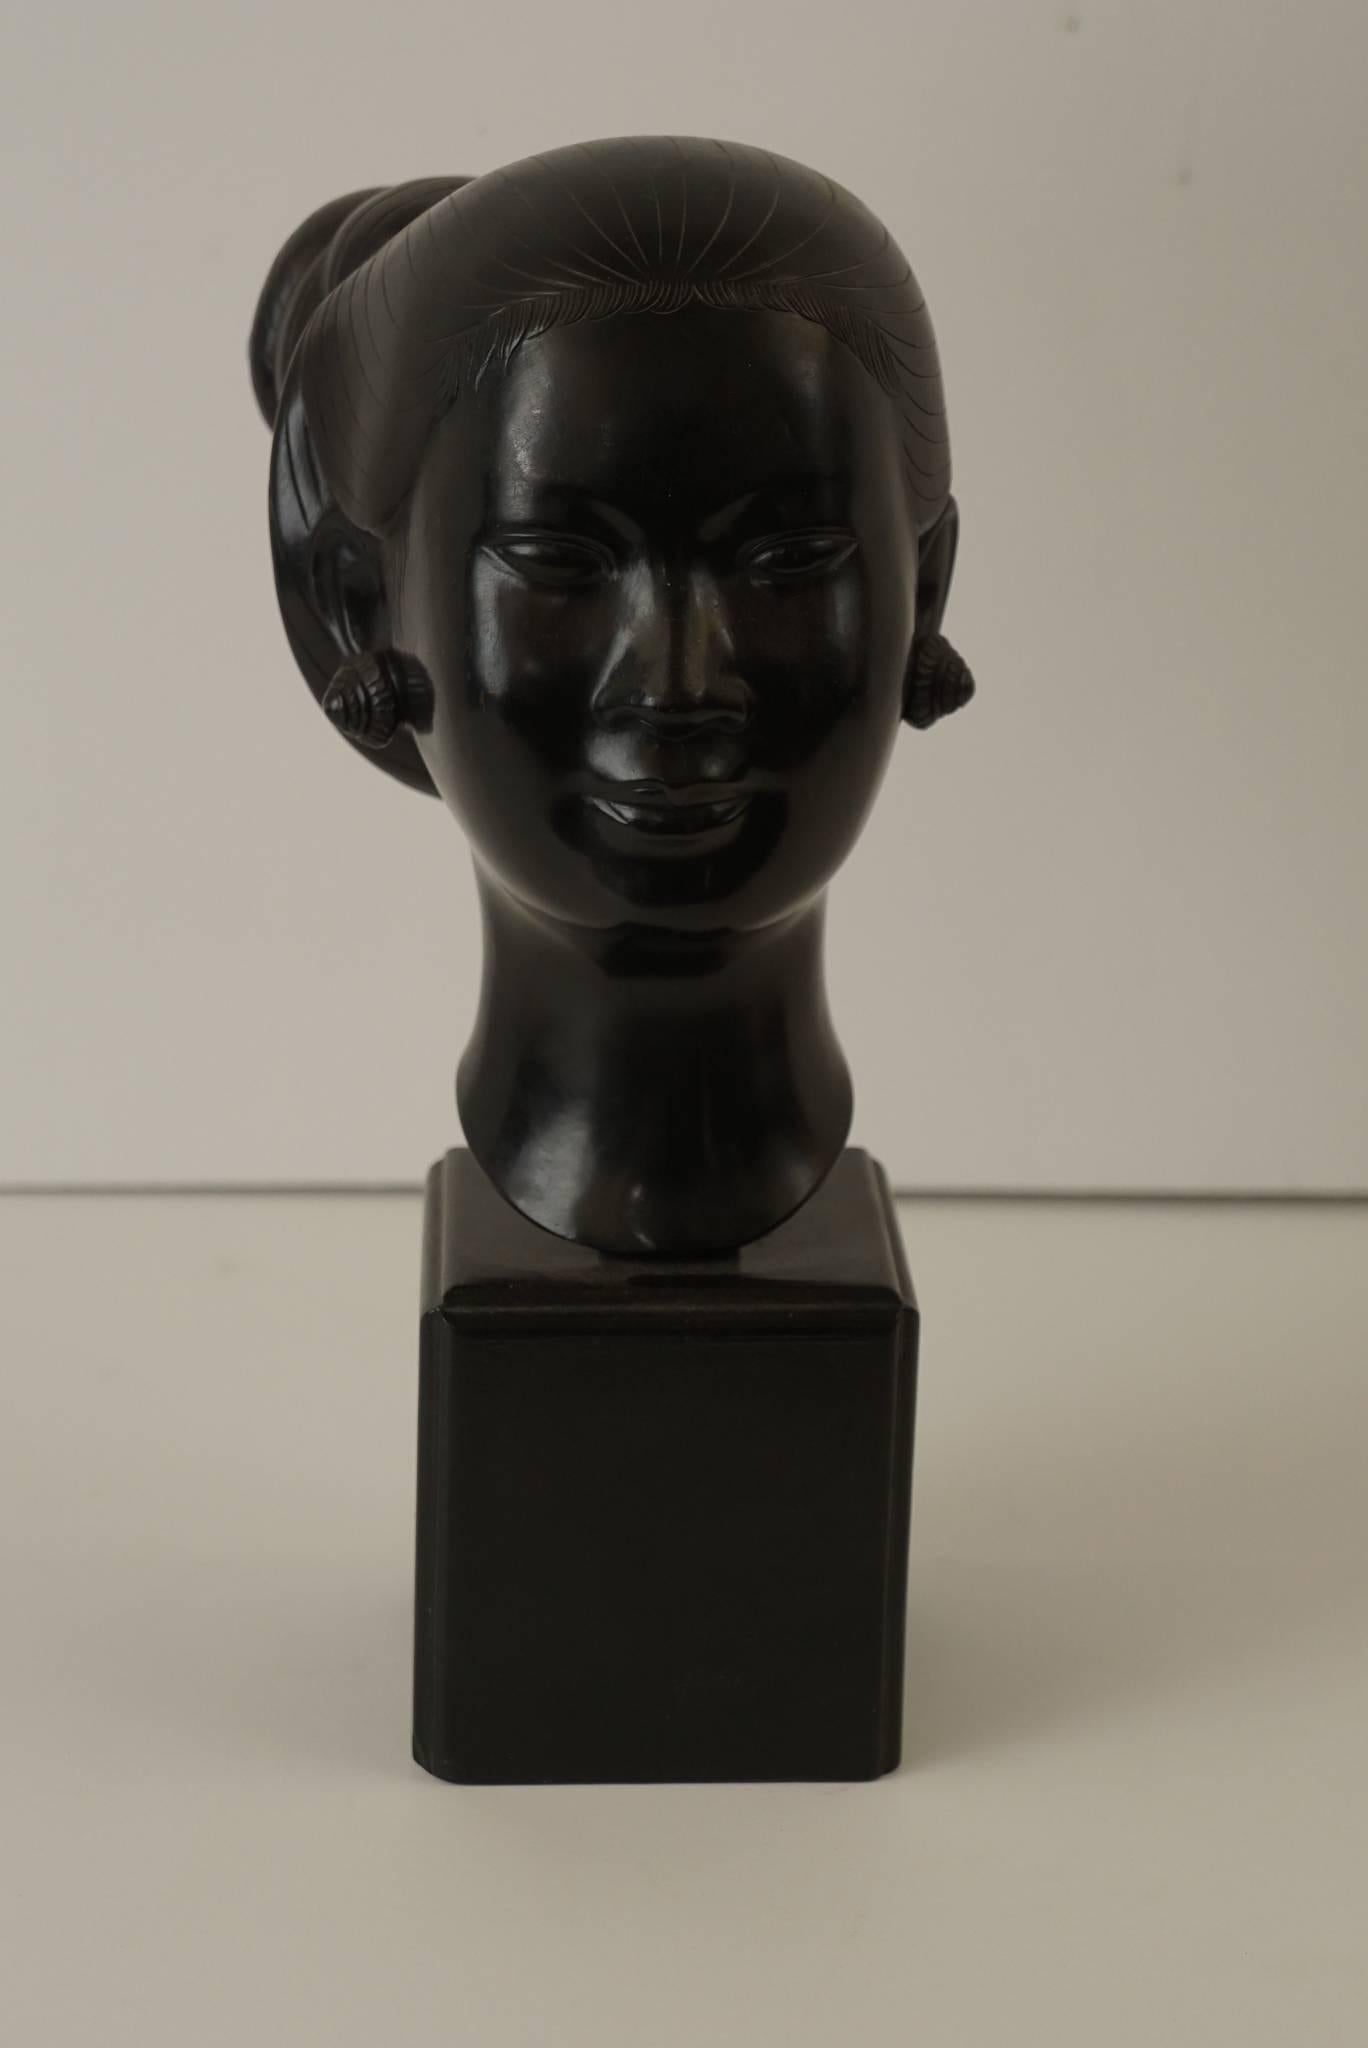 This bust of a Laotian Women is one of the artist most recognizable sculptural works.The distinctive and detailed work is done in a modern style and has an affinity to the best works shown in Europe particularly bronzes done in France and Germany